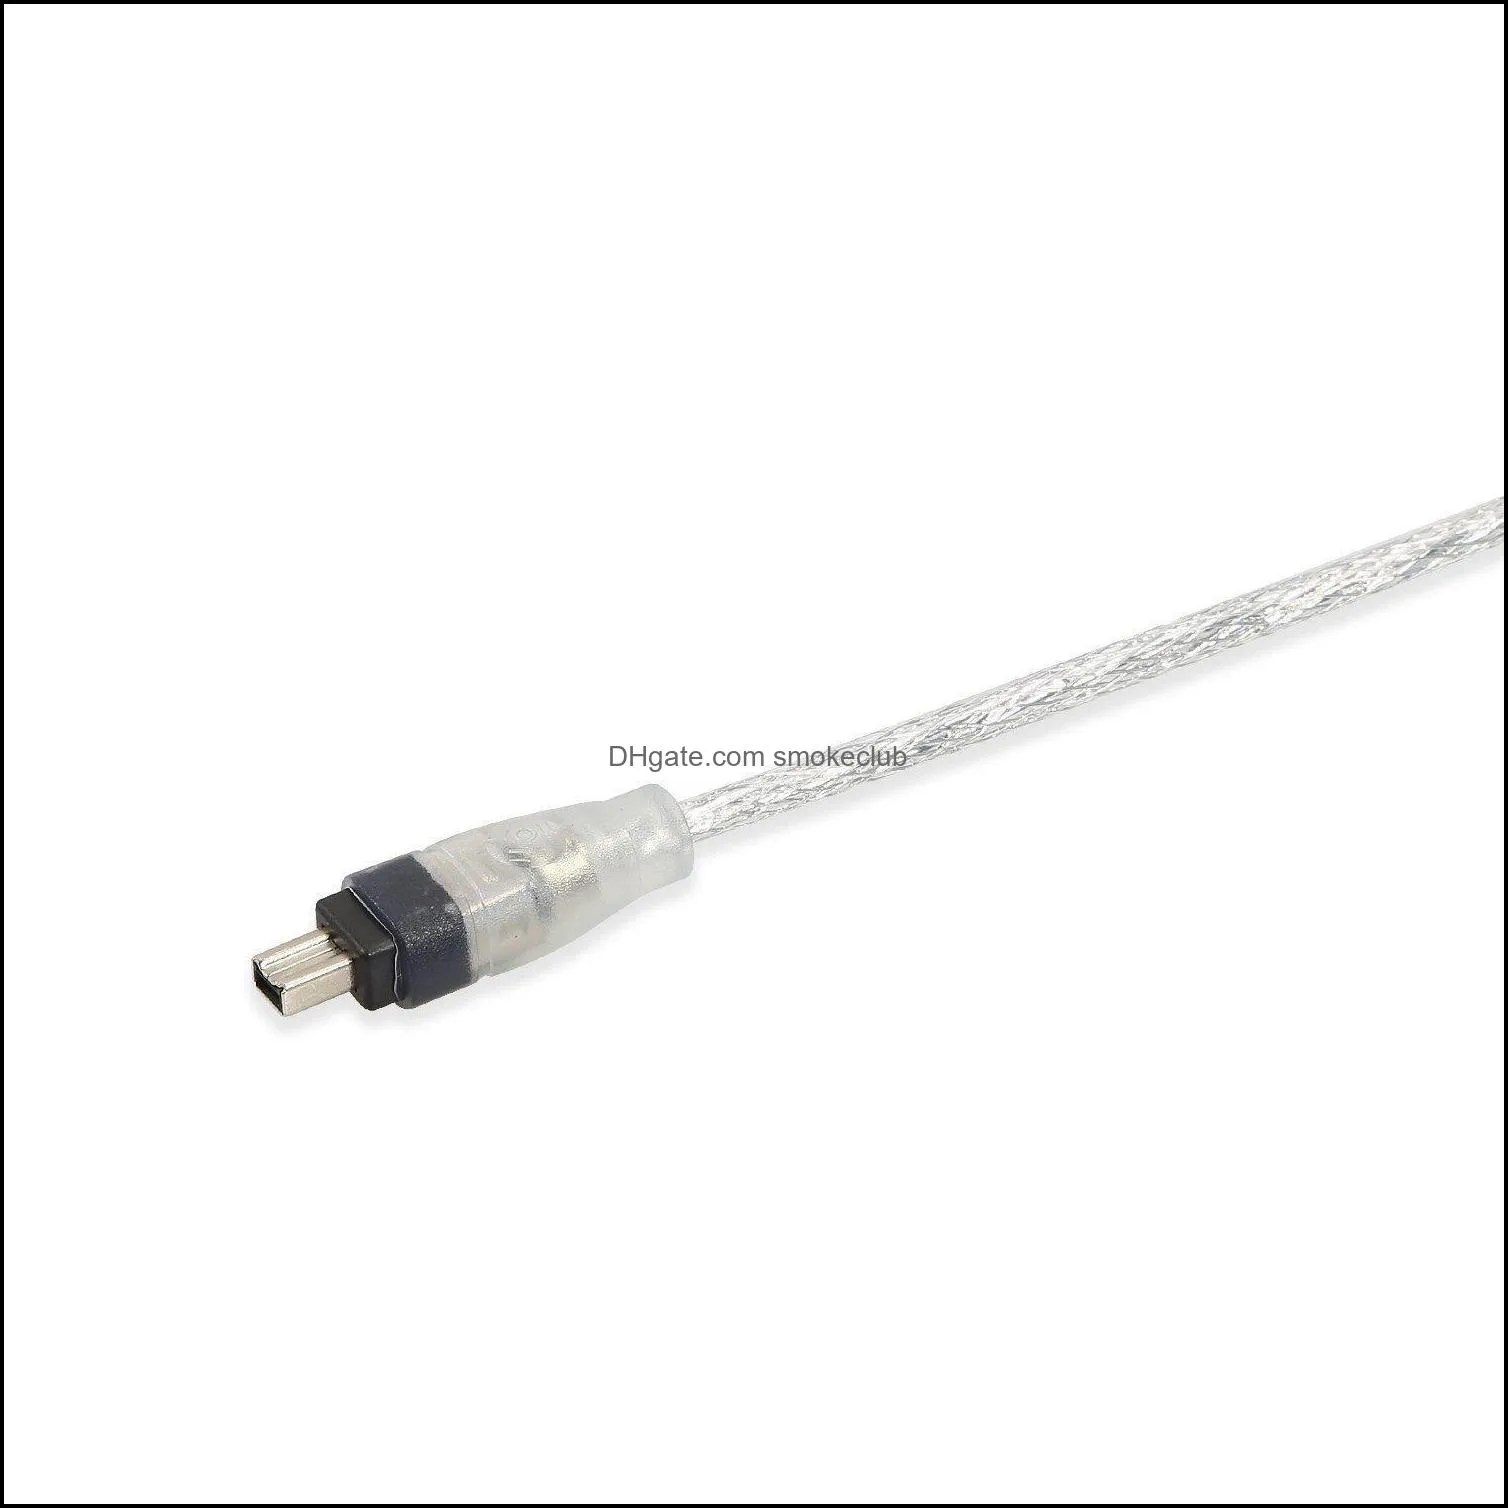 USB To Firewire IEEE 1394 4 Pin iLink Adapter Data Cable 5ft 1.5m Clear and Black